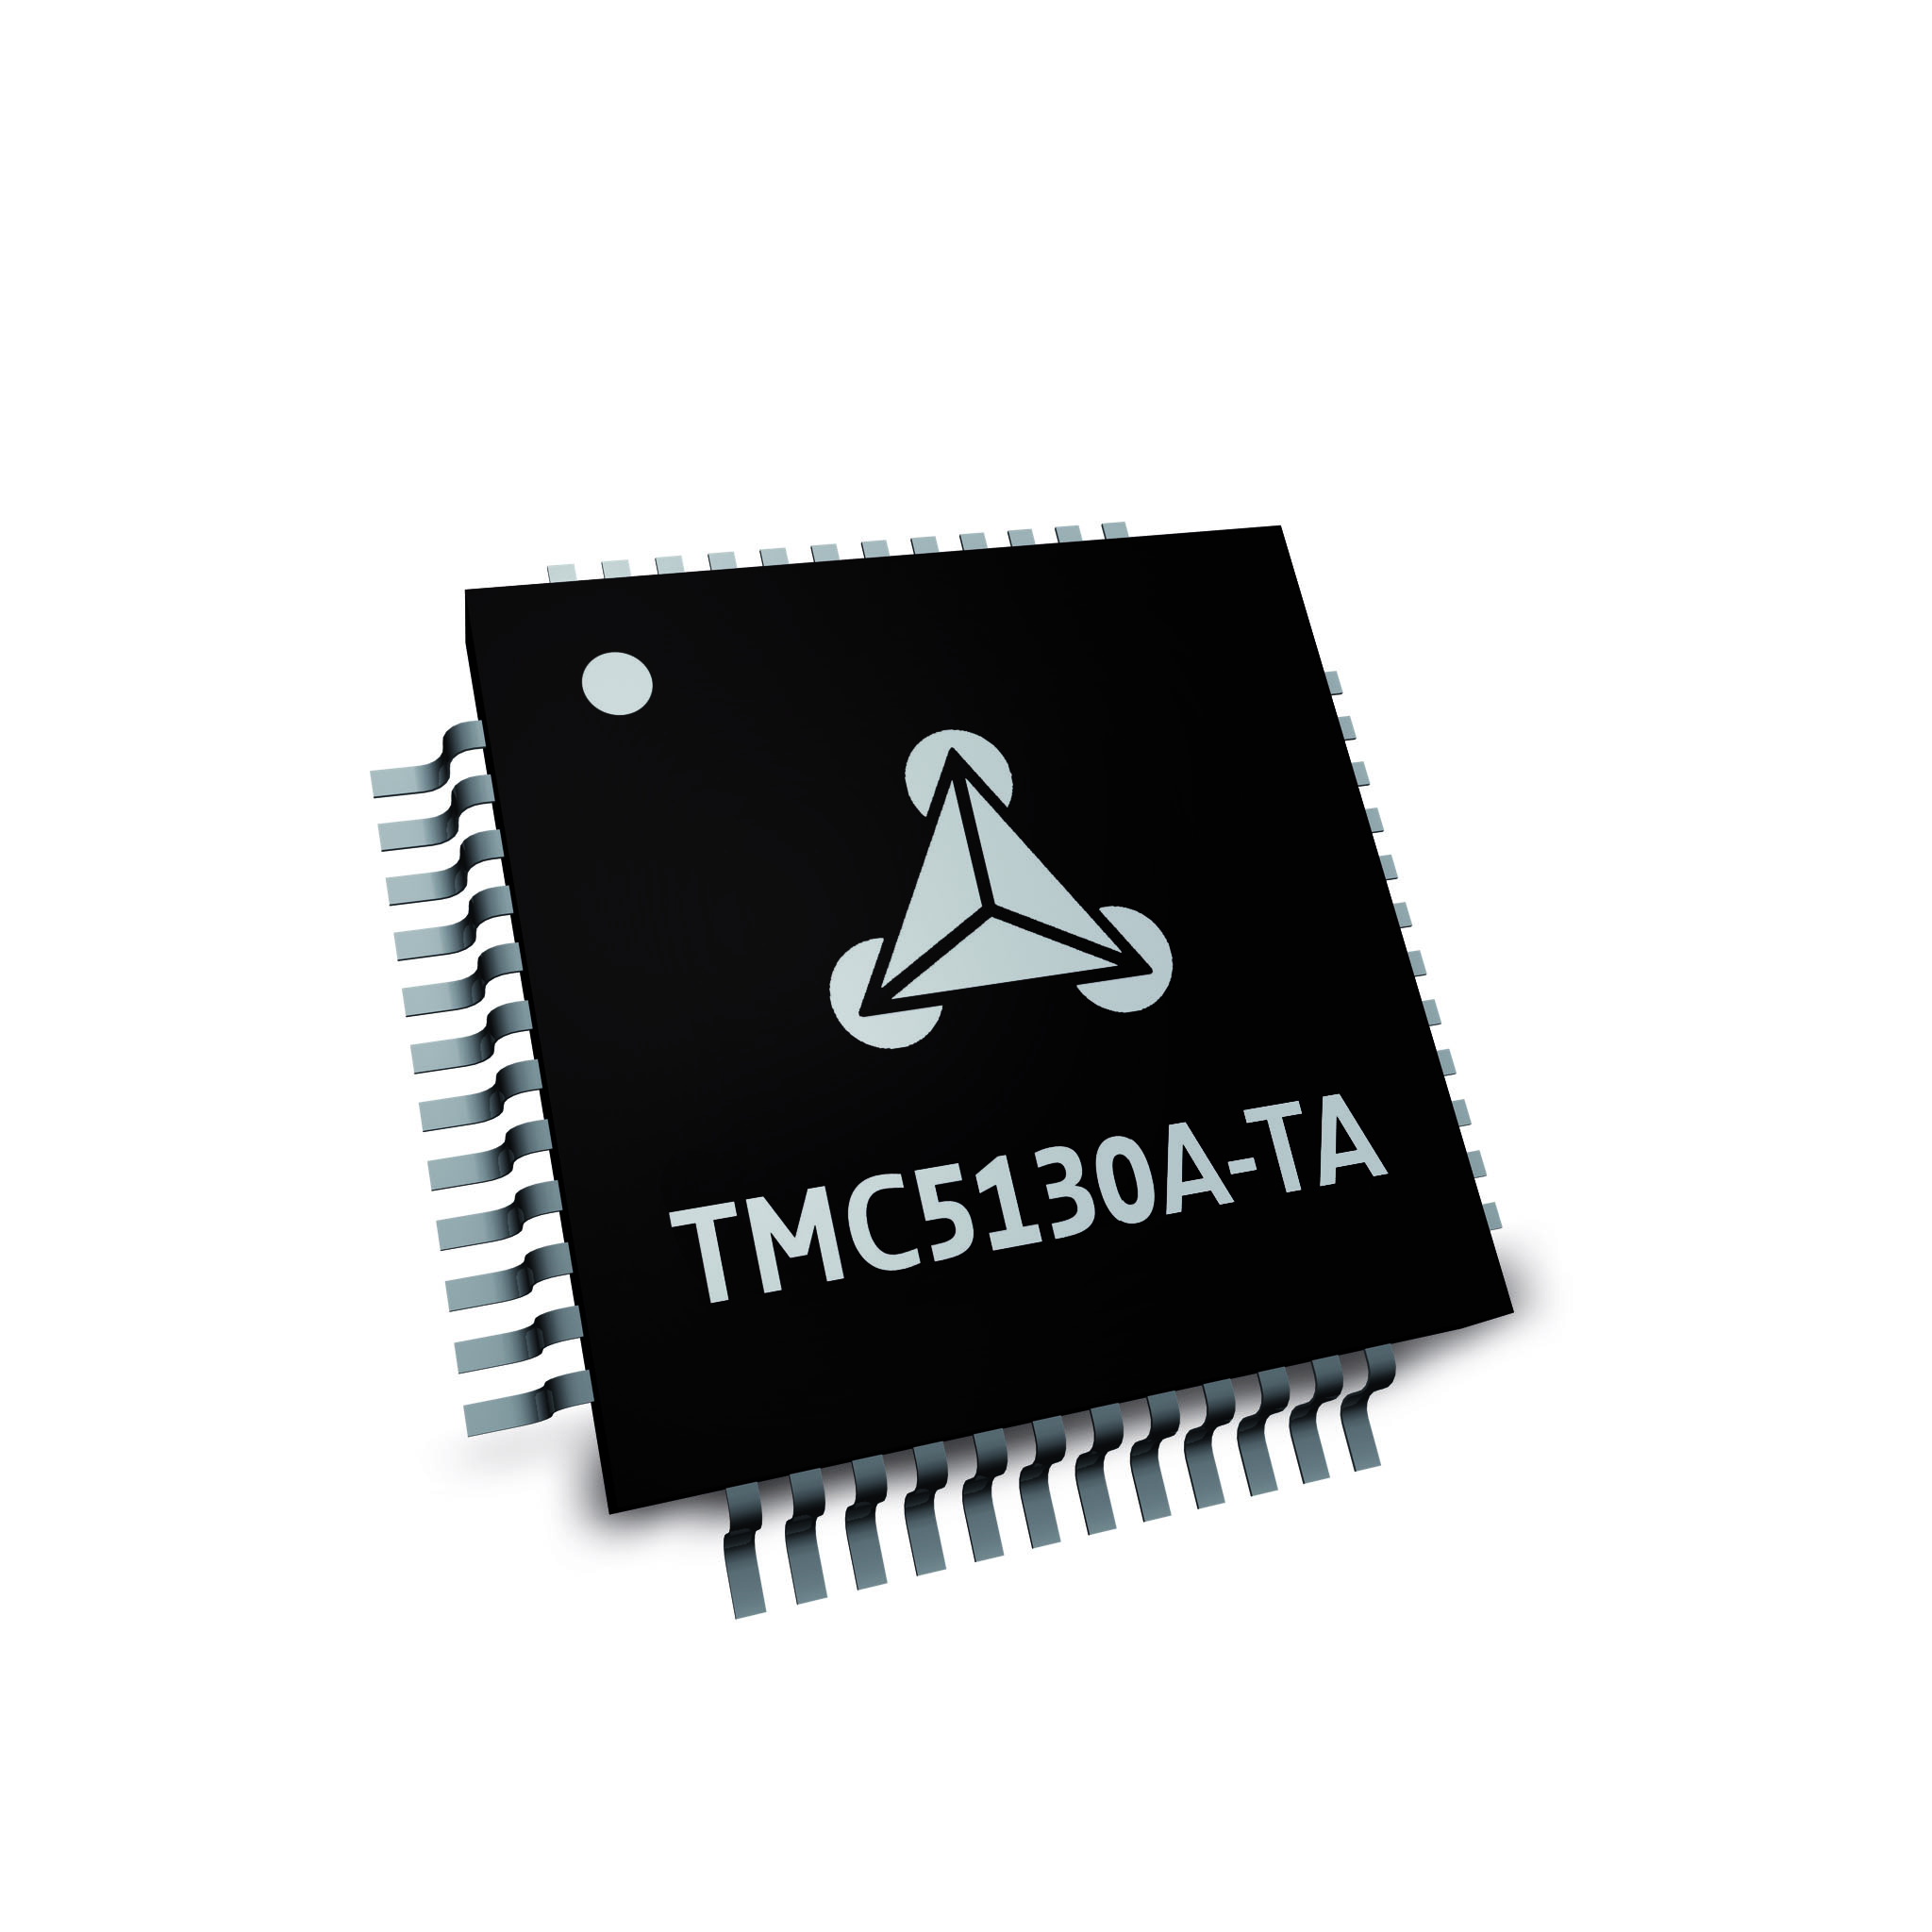 TRINAMIC's latest stepper motion control IC with integrated motor drive touts performance